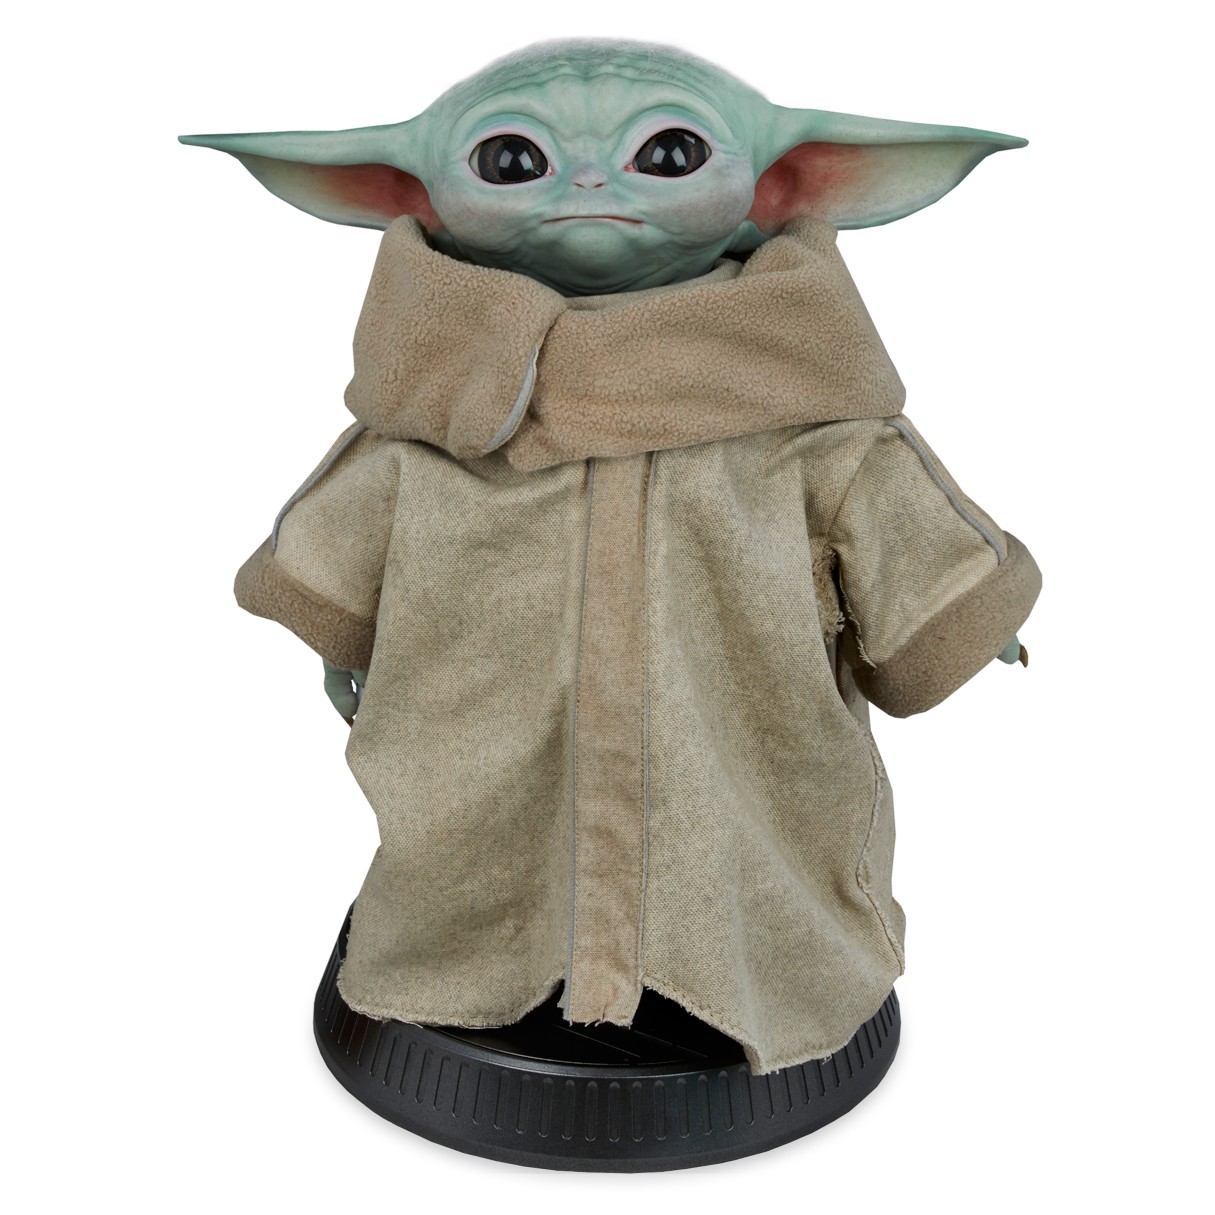 The Child Life-Size Figure by Sideshow – Star Wars: The